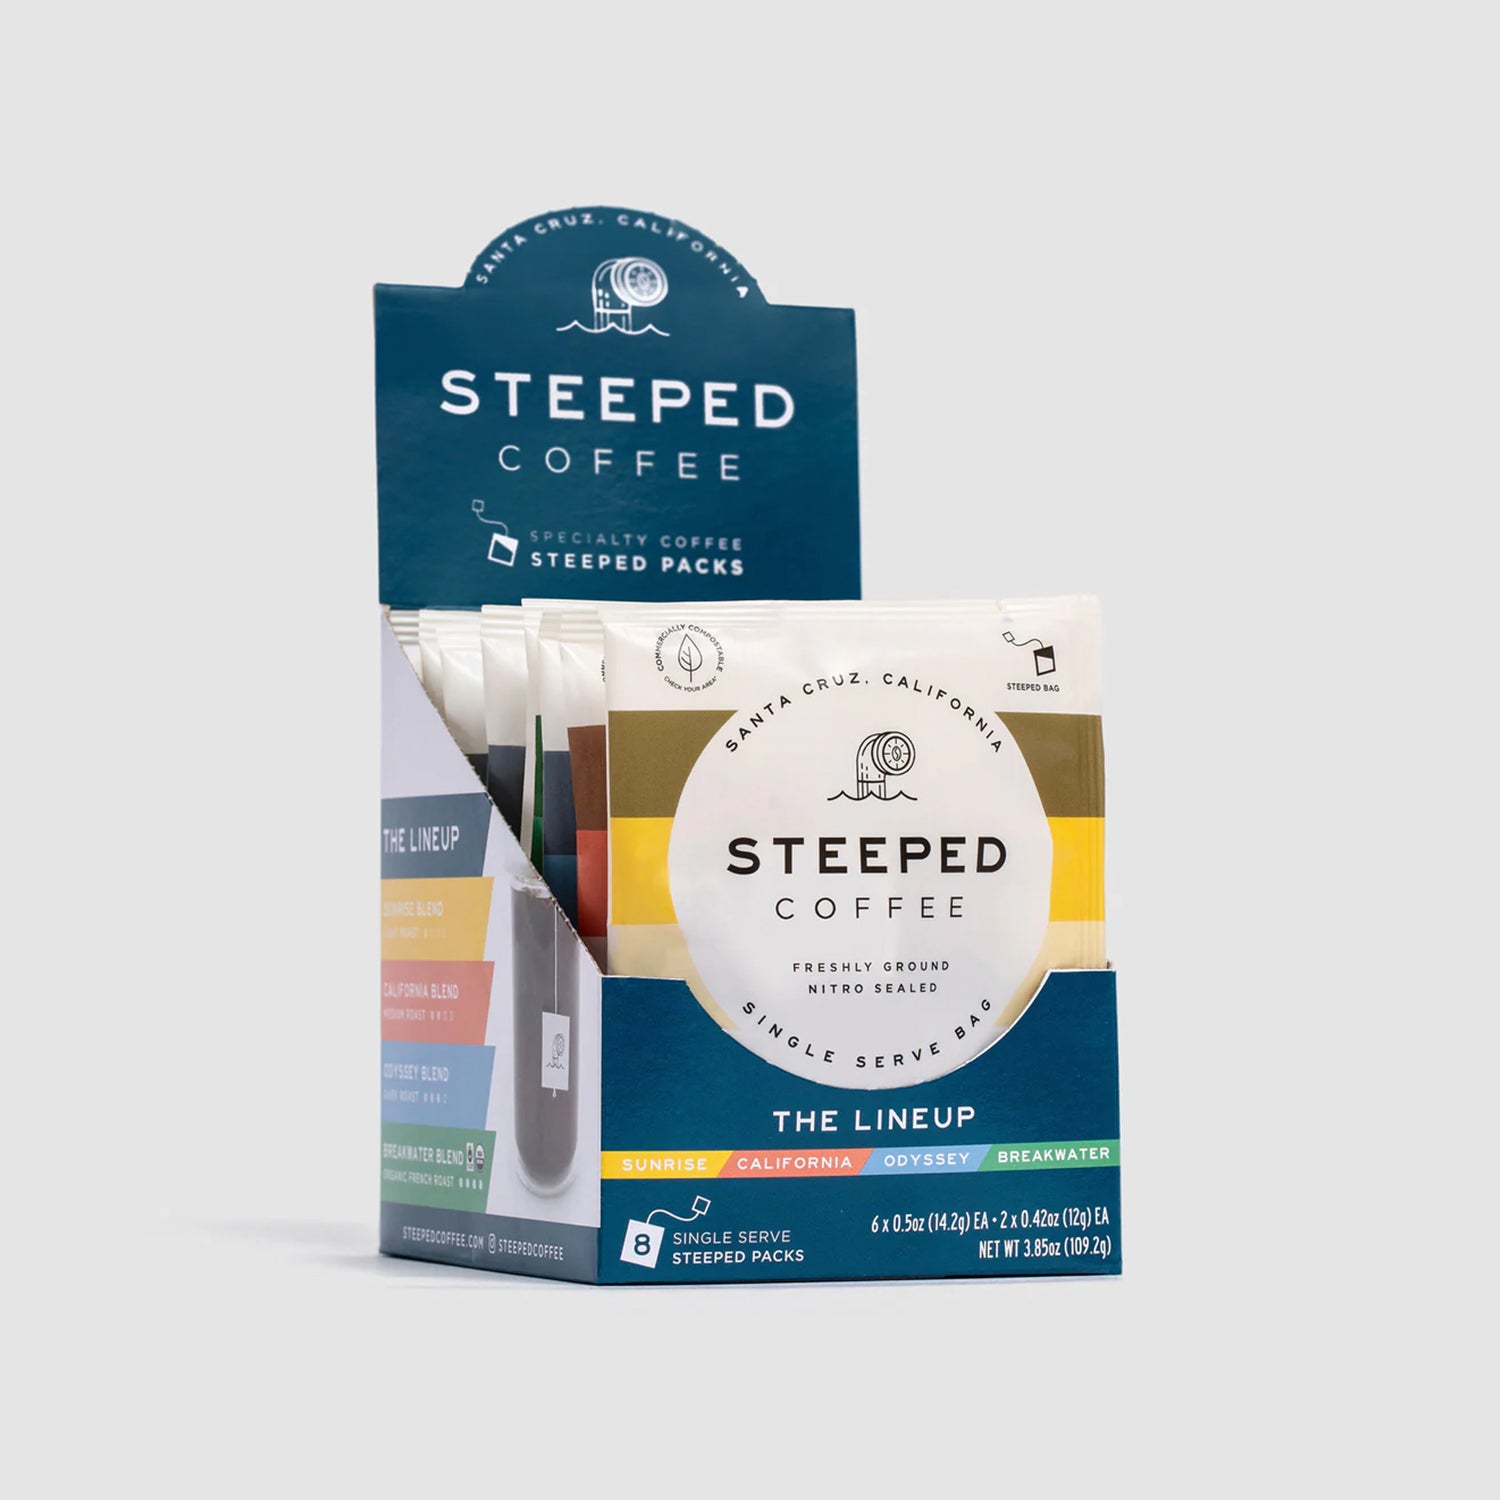 [THE LINEUP] Steeped's Best Selling Blends